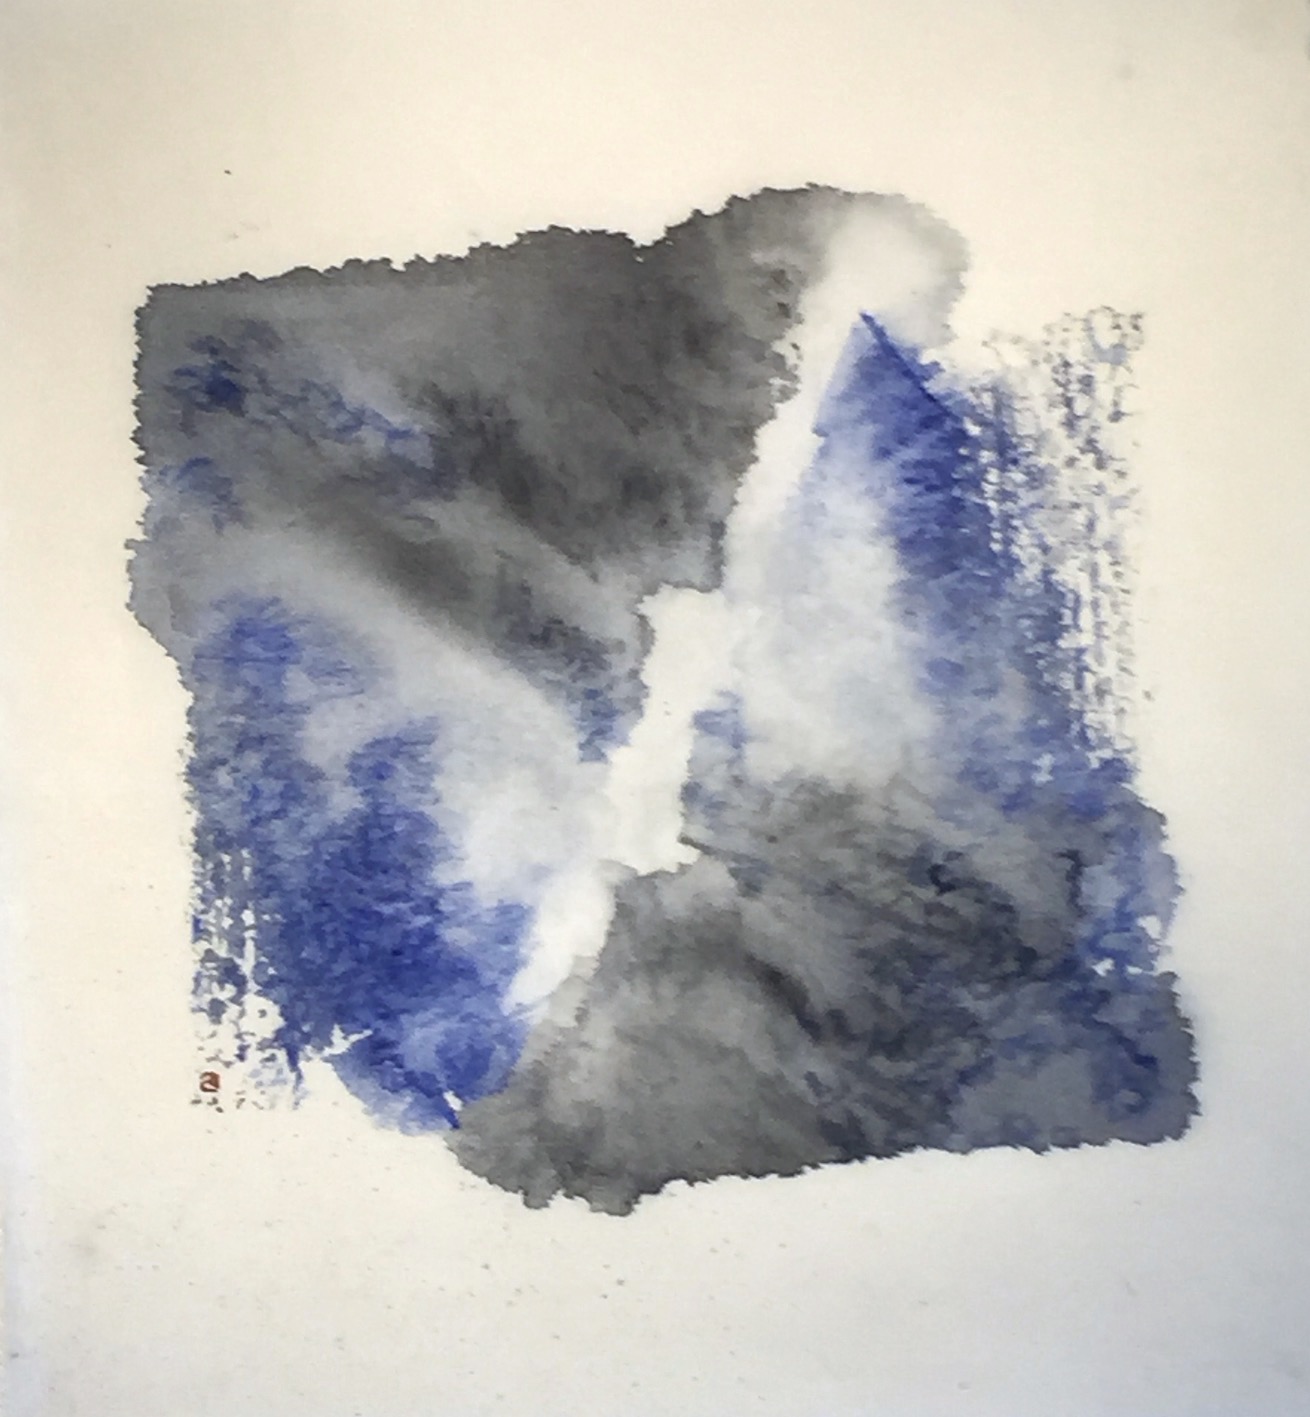 Sky in a Square 3 35 X 33 cms sumi ink, acrylic 資格の空　3 墨アクリル　2020